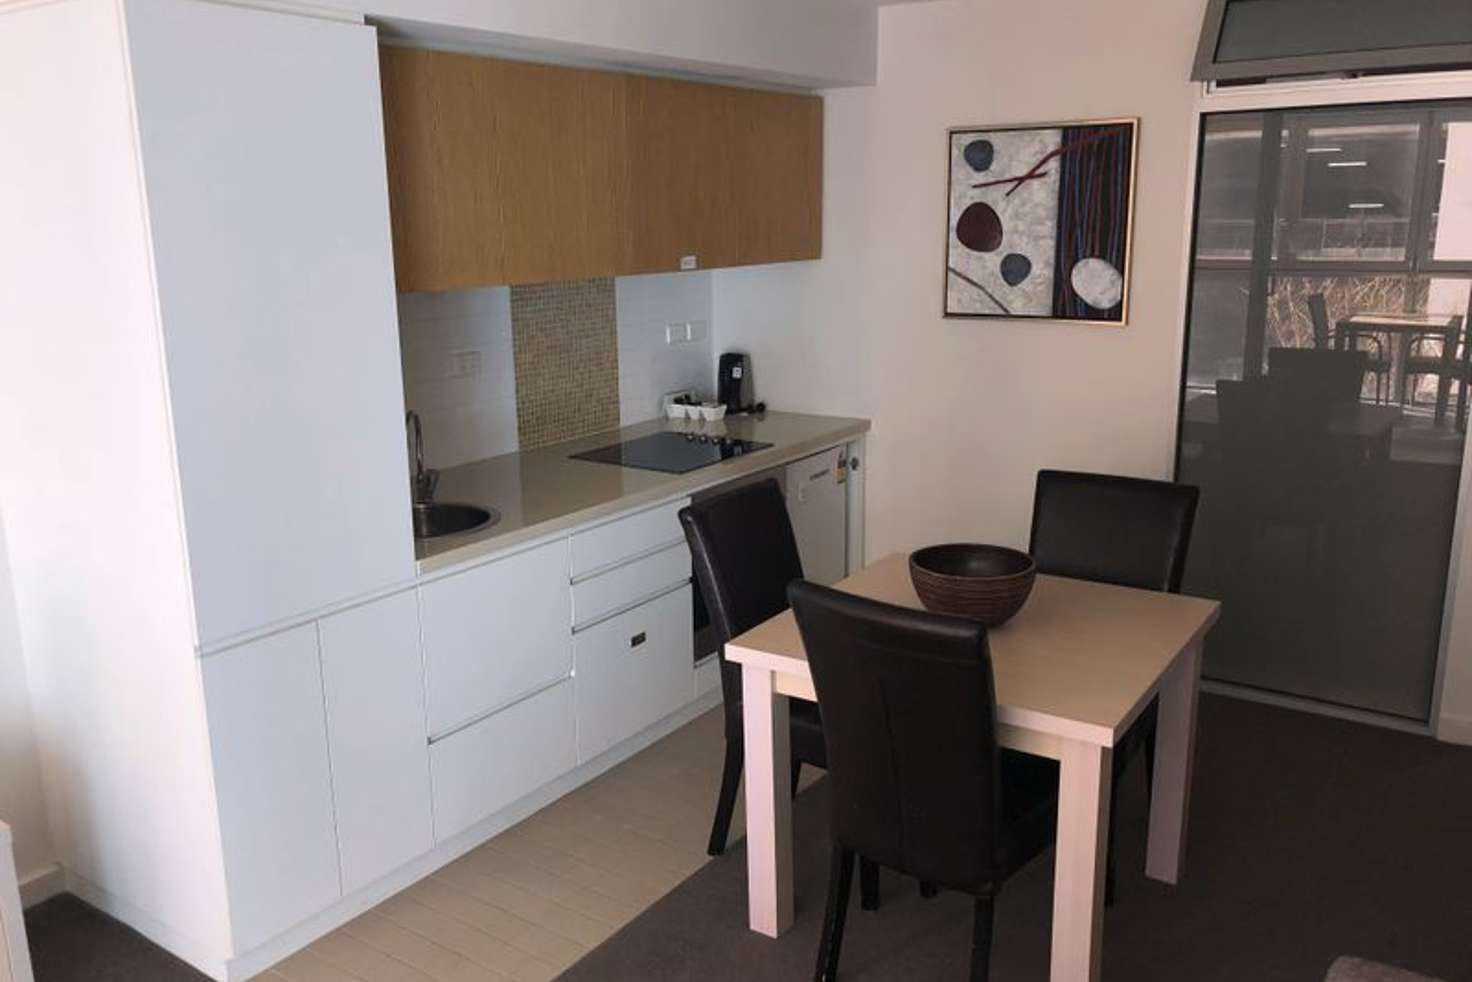 Main view of Homely apartment listing, 205/10 Balfours Way, Adelaide SA 5000